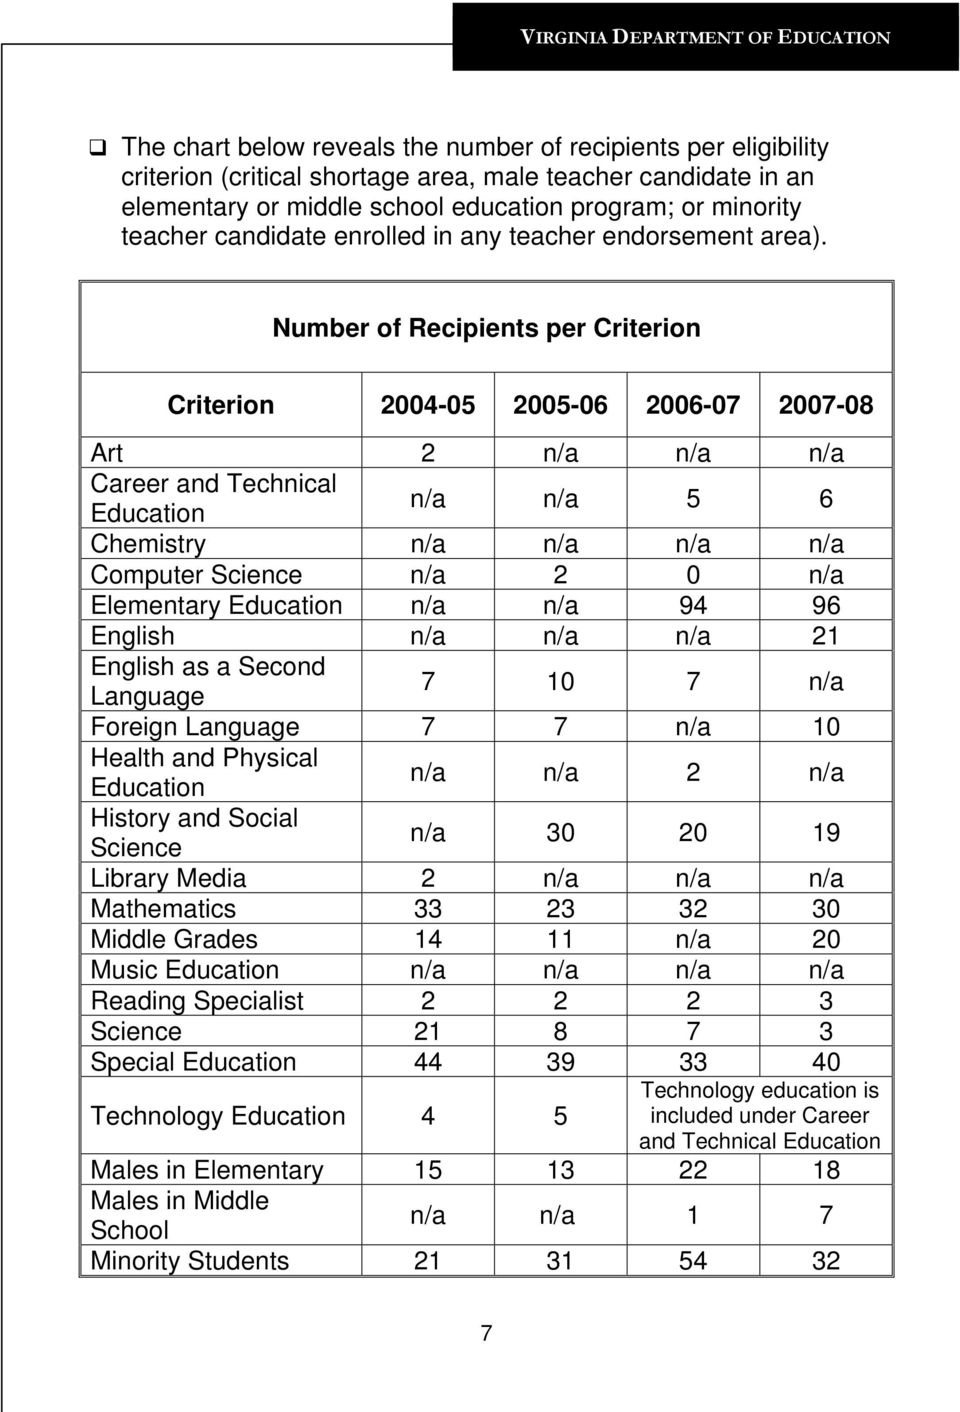 Number of Recipients per Criterion Criterion 2004-05 2005-06 2006-07 2007-08 Art 2 n/a n/a n/a Career and Technical Education n/a n/a 5 6 Chemistry n/a n/a n/a n/a Computer Science n/a 2 0 n/a